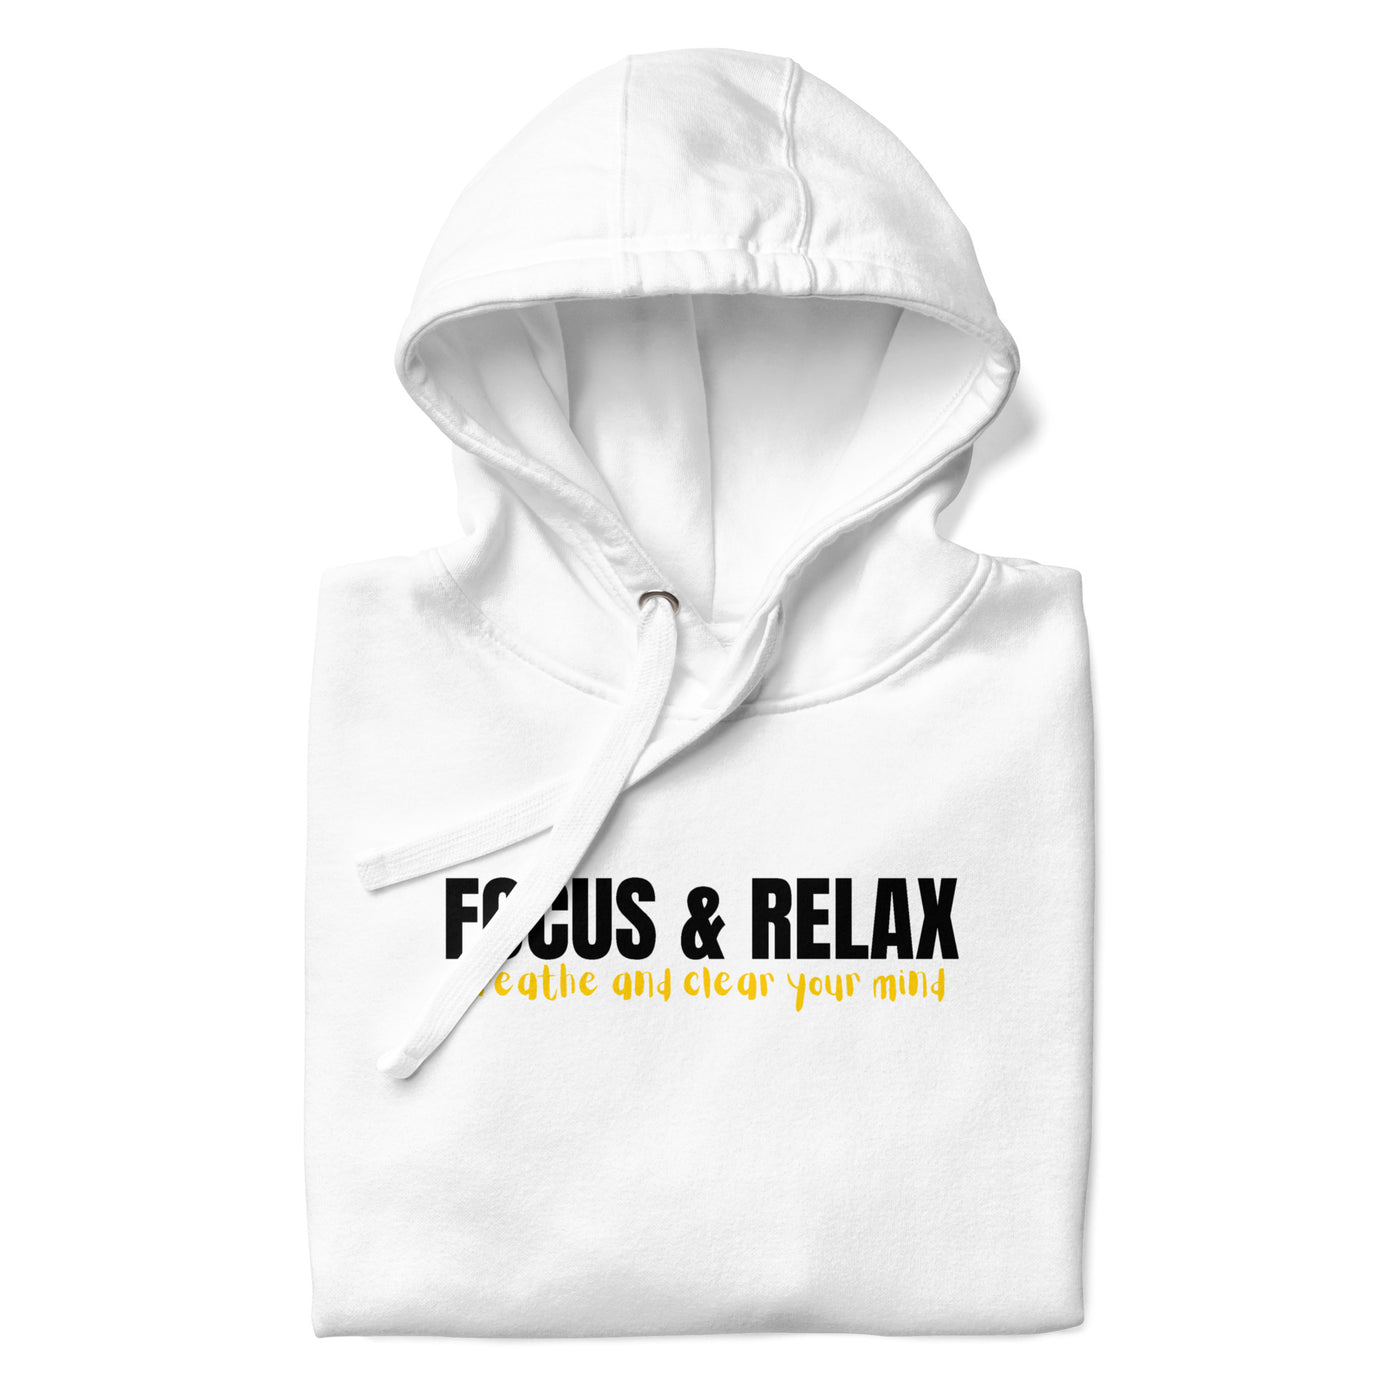 Women’s White Hoodie - Focus and Relax